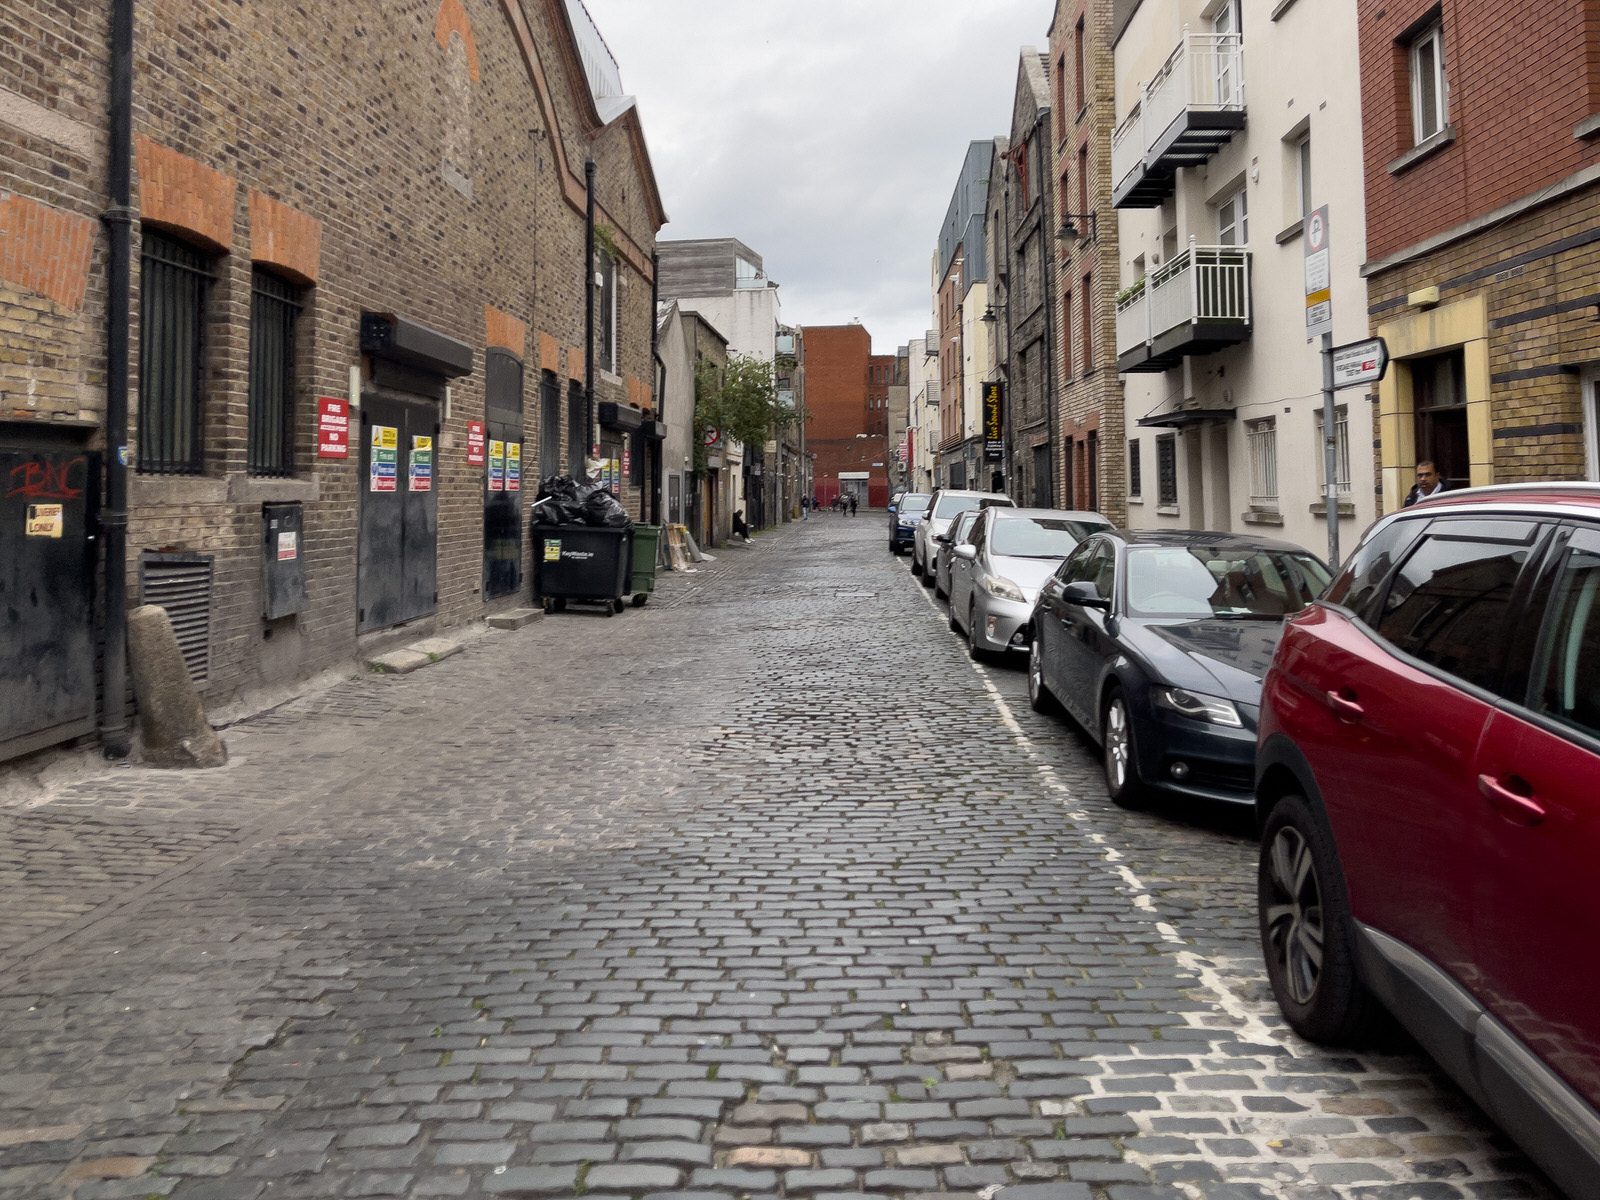 THE STREET SIGN SAYS NORTH LOTTS [A HISTORIC AREA OF DUBLIN]--225697-1